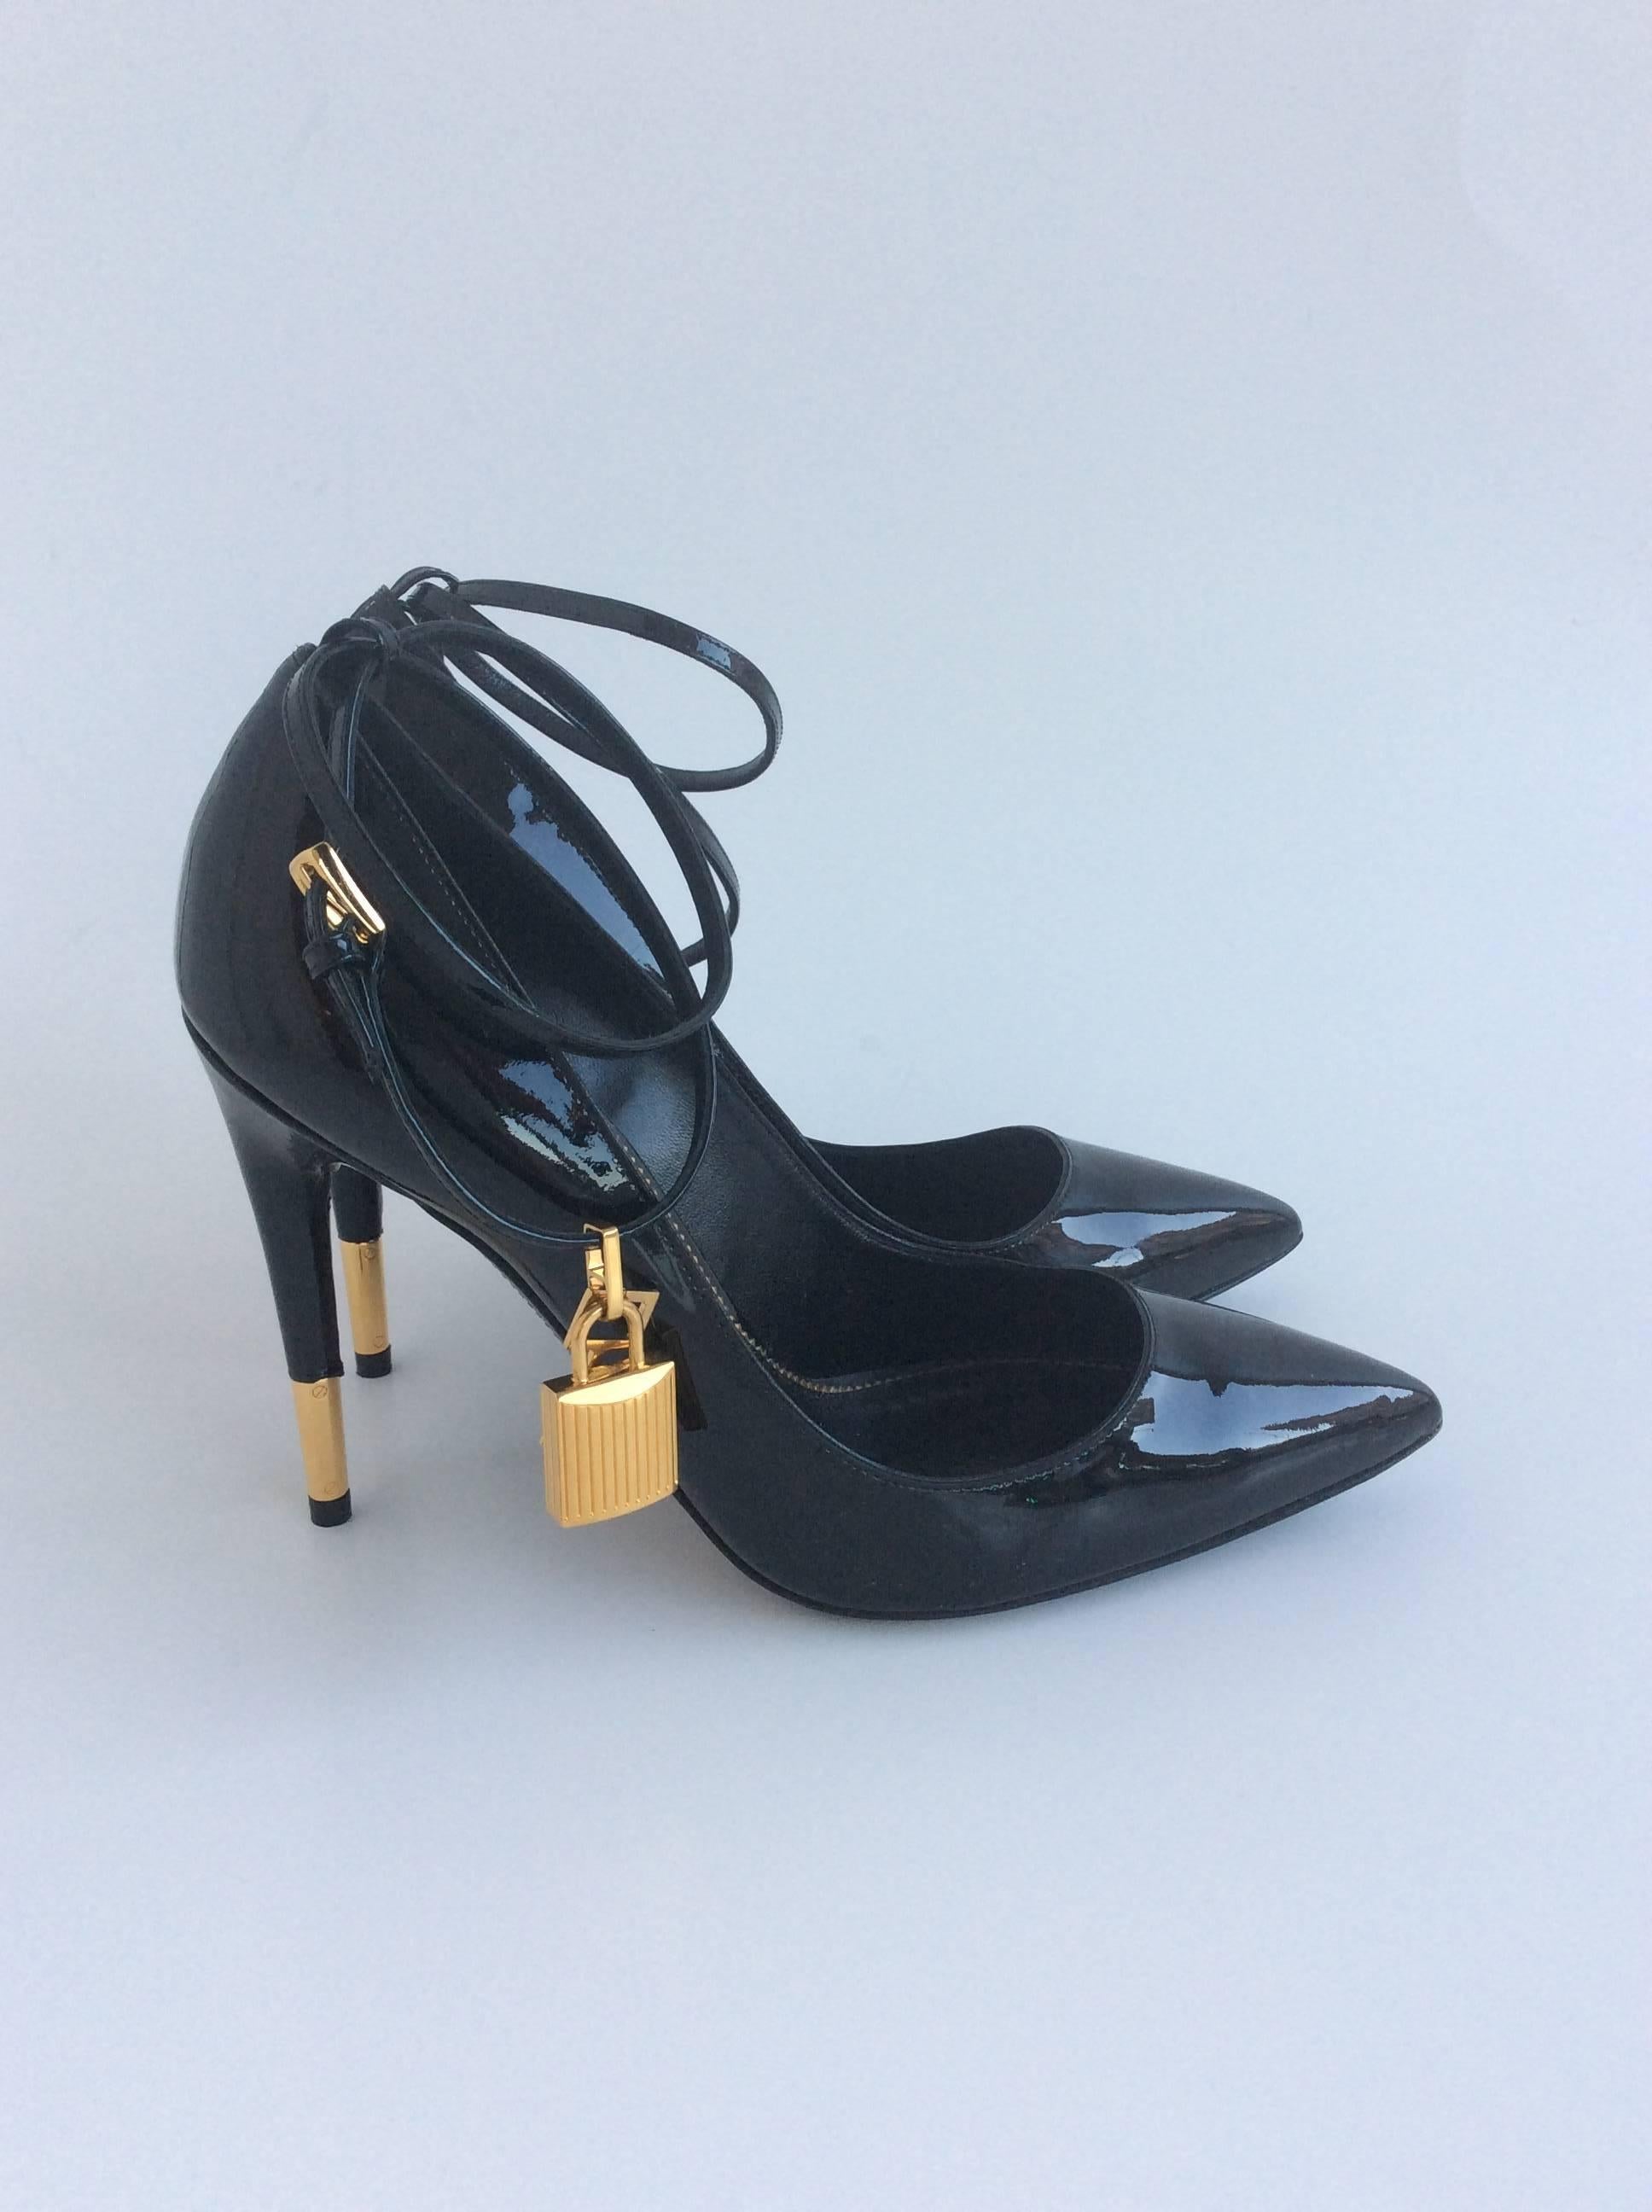 Striking Tom Ford black patent pointy pumps with double ankle strap with a gold lock and key removable charm on each shoe. The gold tipped stiletto heel is 4”.

The shoe are brand new bu the soles have been purposely scratched to avoid slipping.